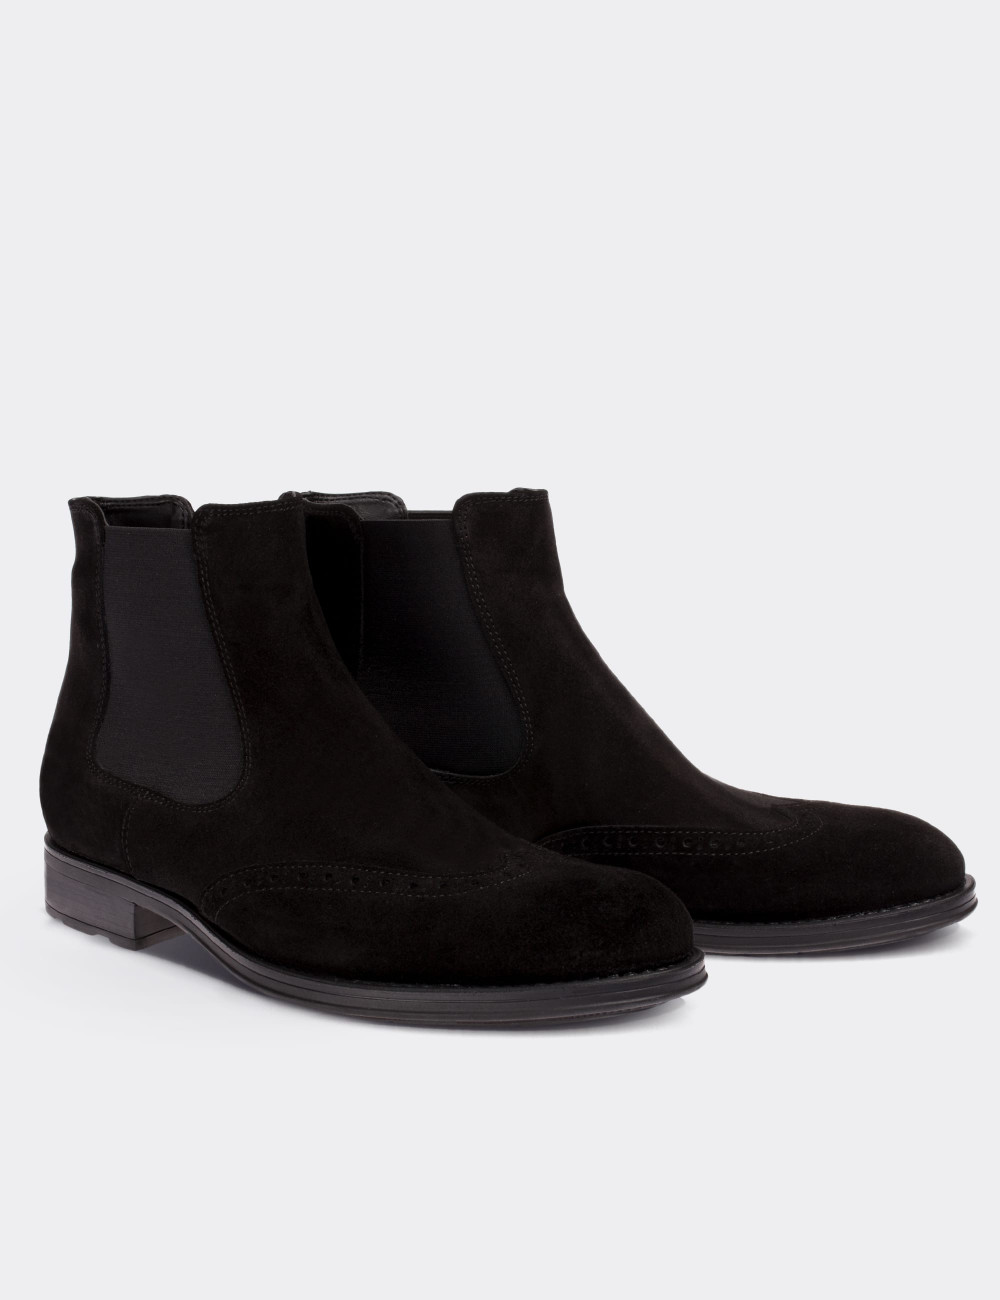 Black Suede Leather Chelsea Boots - 01622MSYHC01